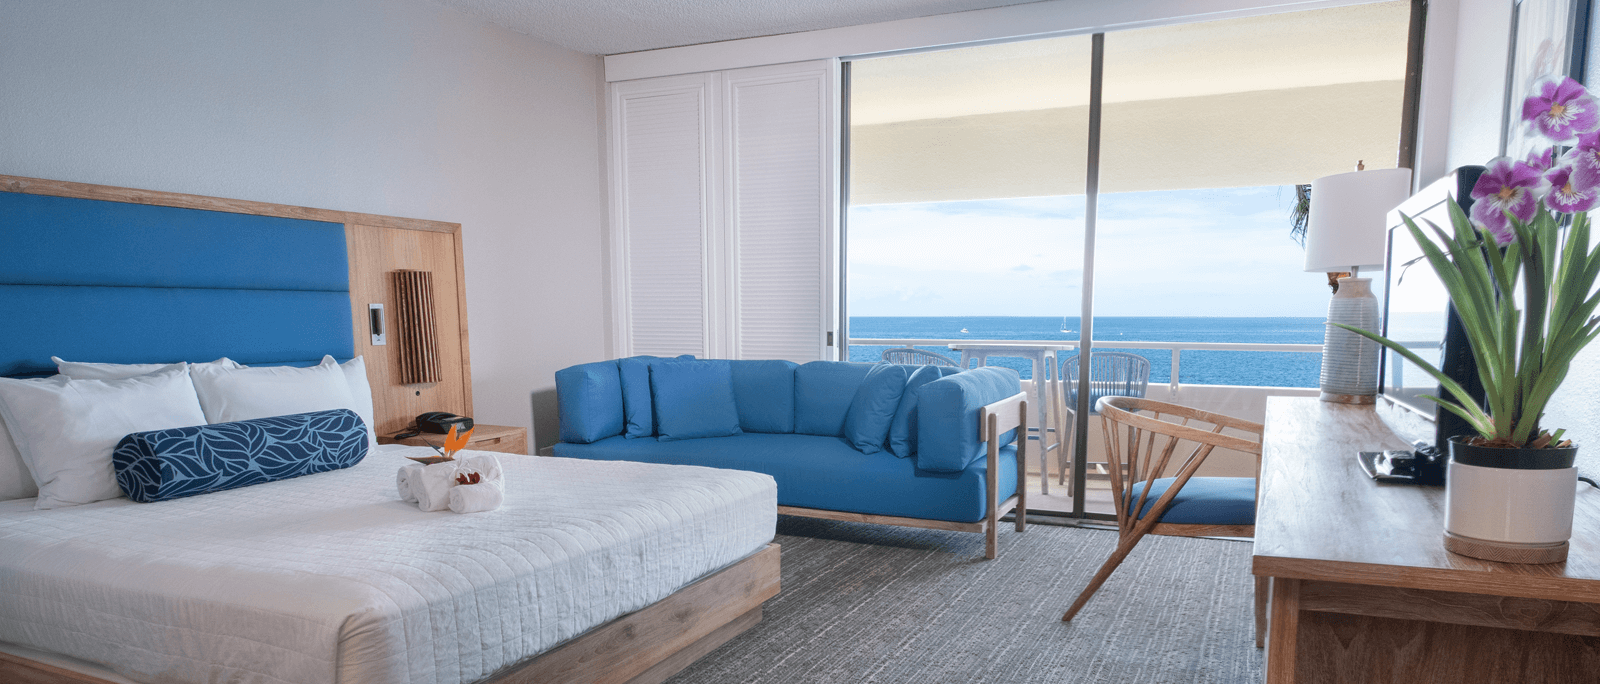 oceanfront room with blue couch